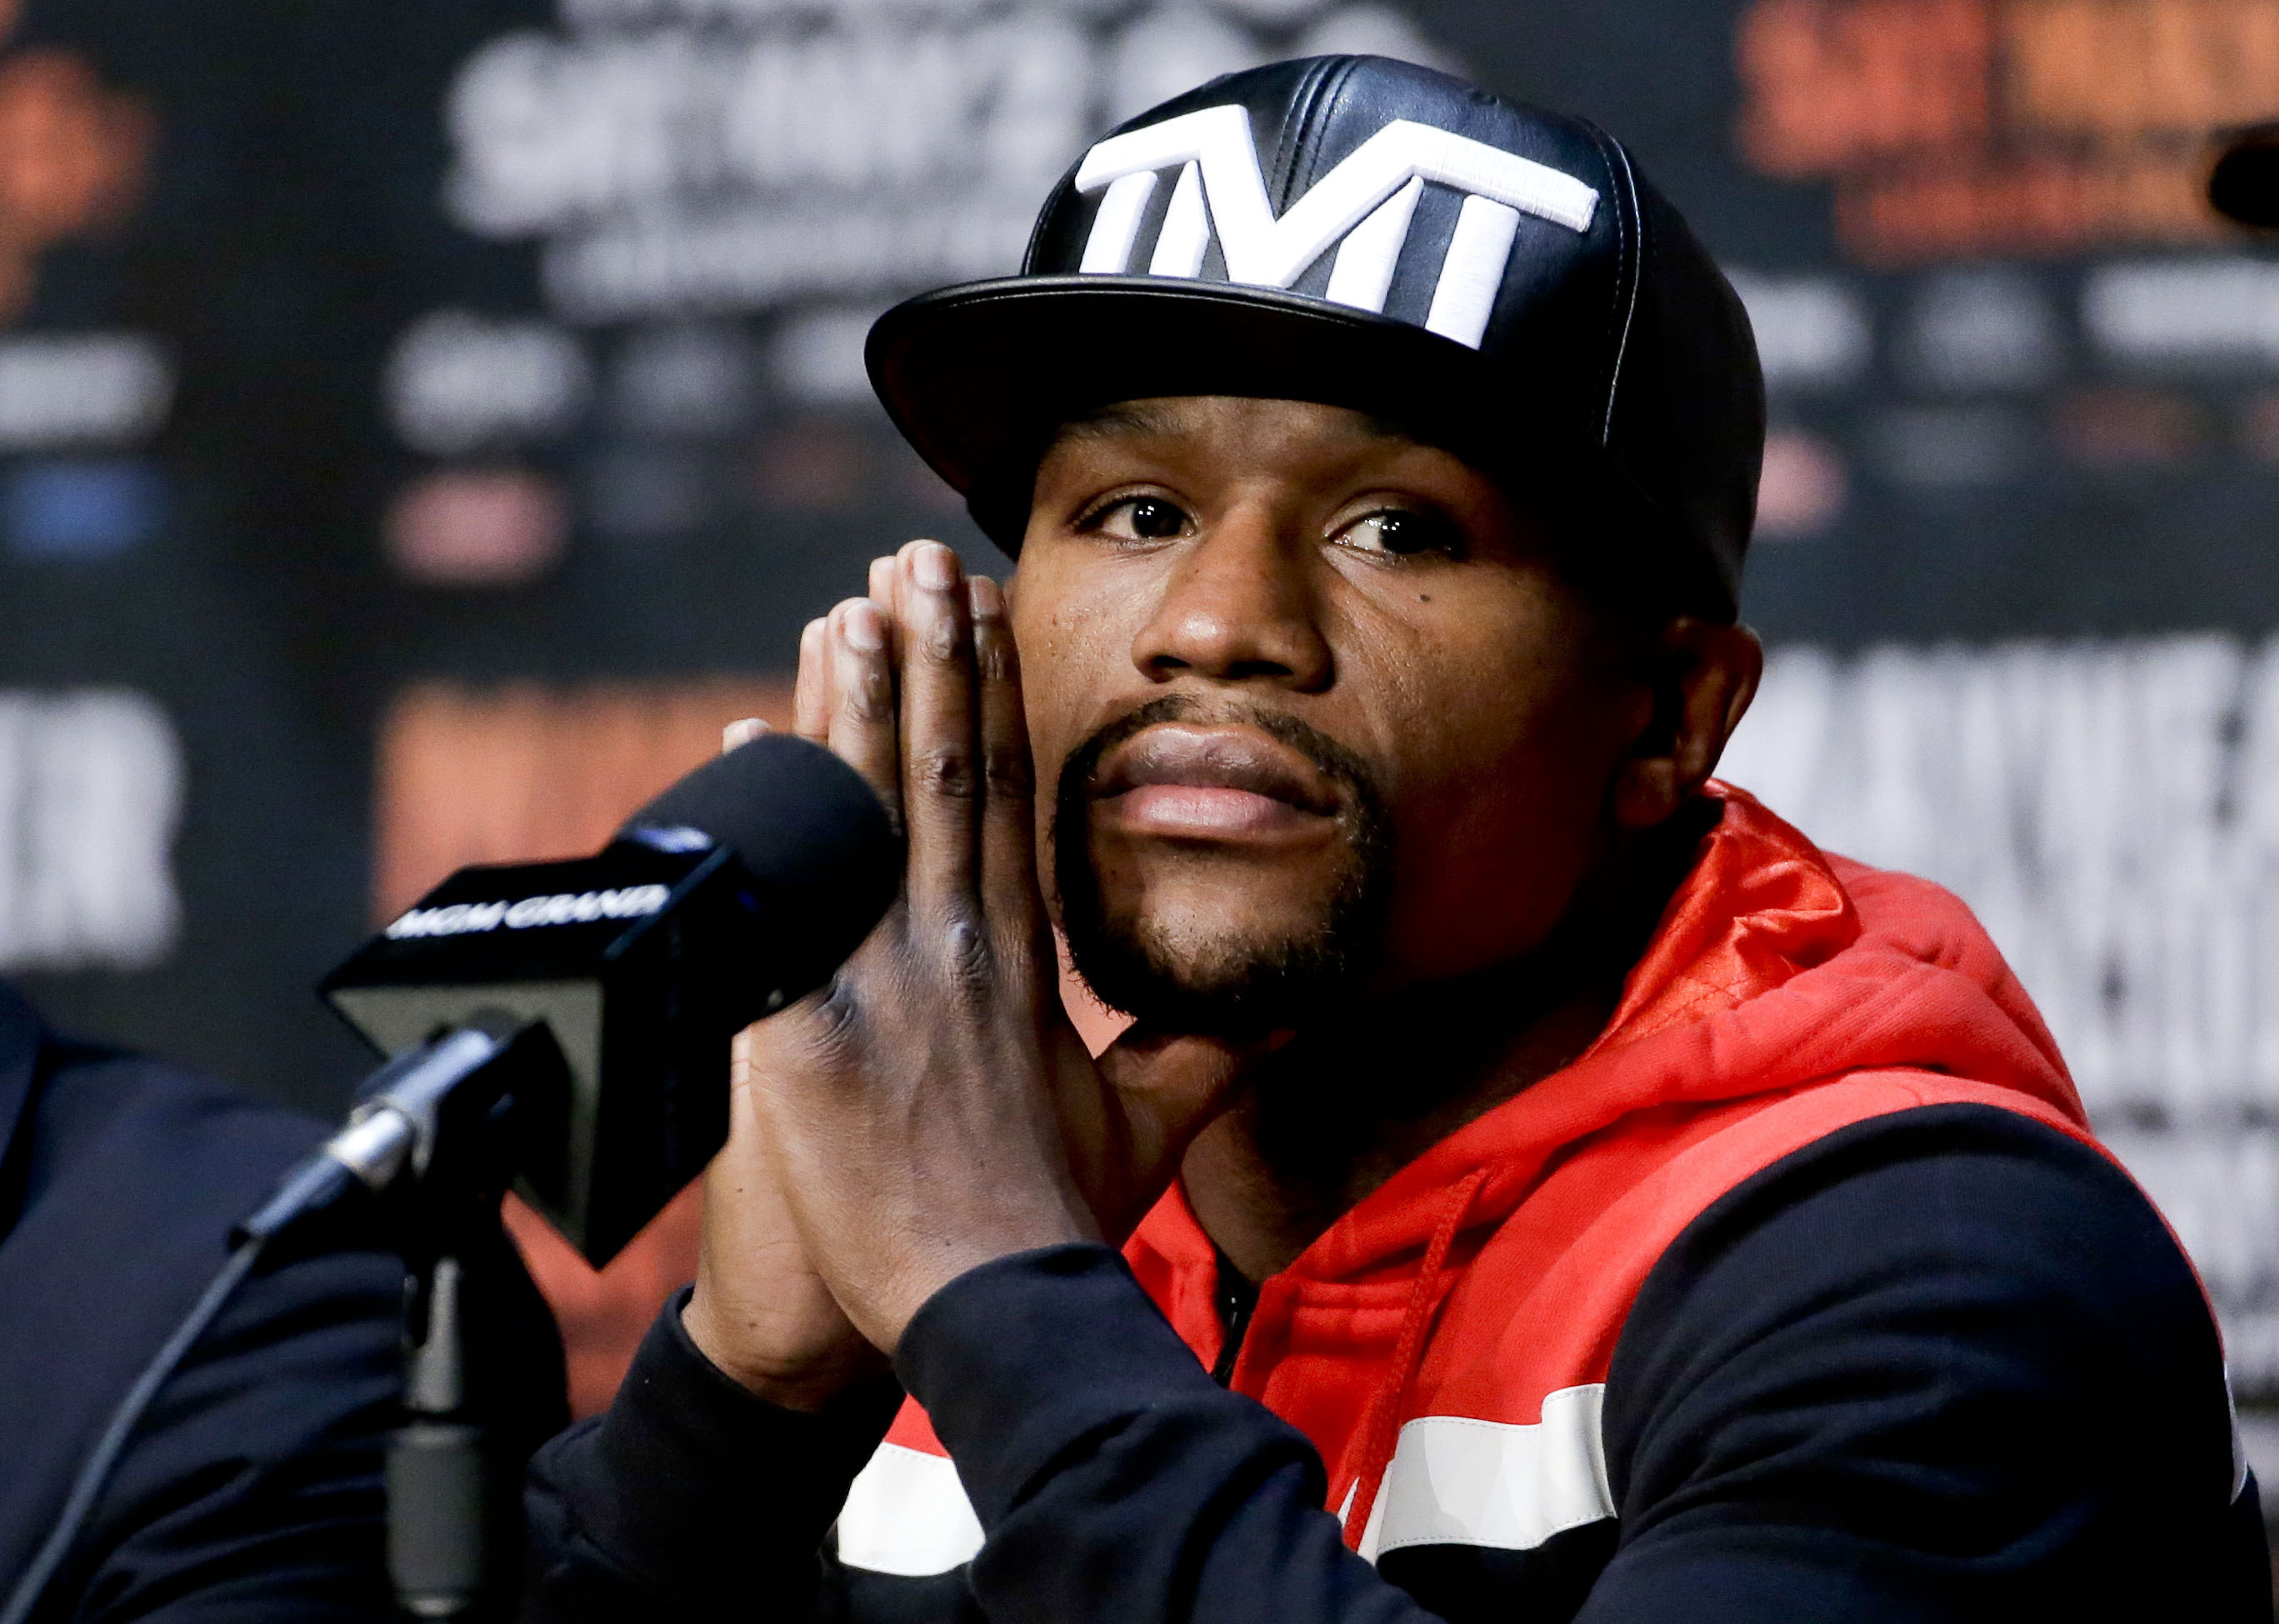 The 11 Most Important Statistics To Remember During Tonight’s Mayweather-Pacquiao Fight